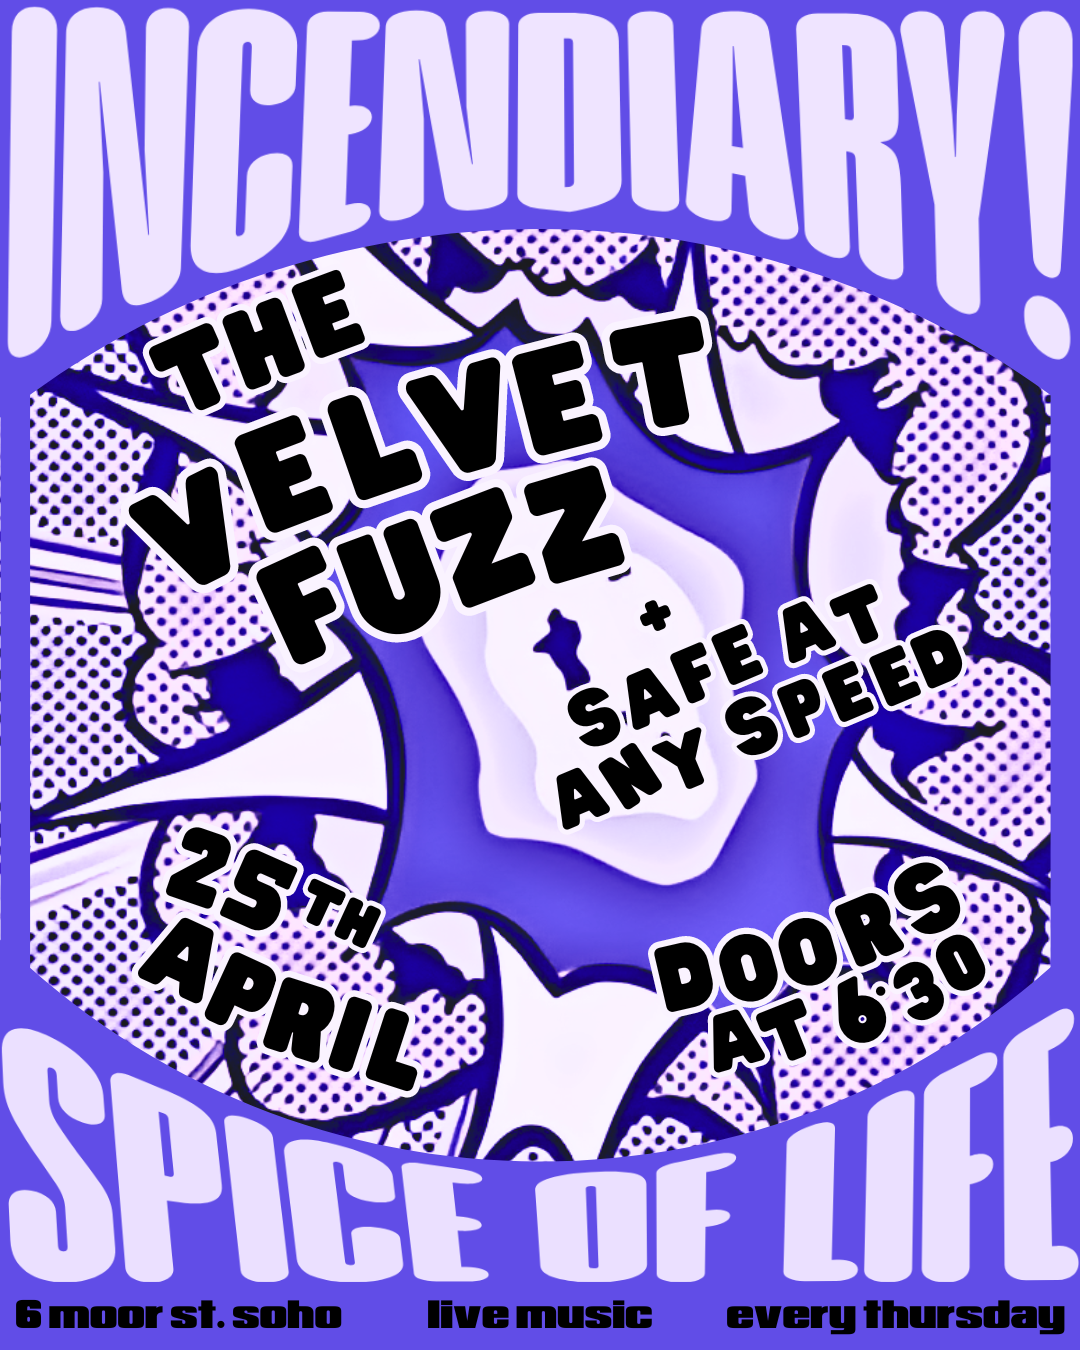 INCENDIARY! FEATURING THE VELVET FUZZ + SAFE AT ANY SPEED